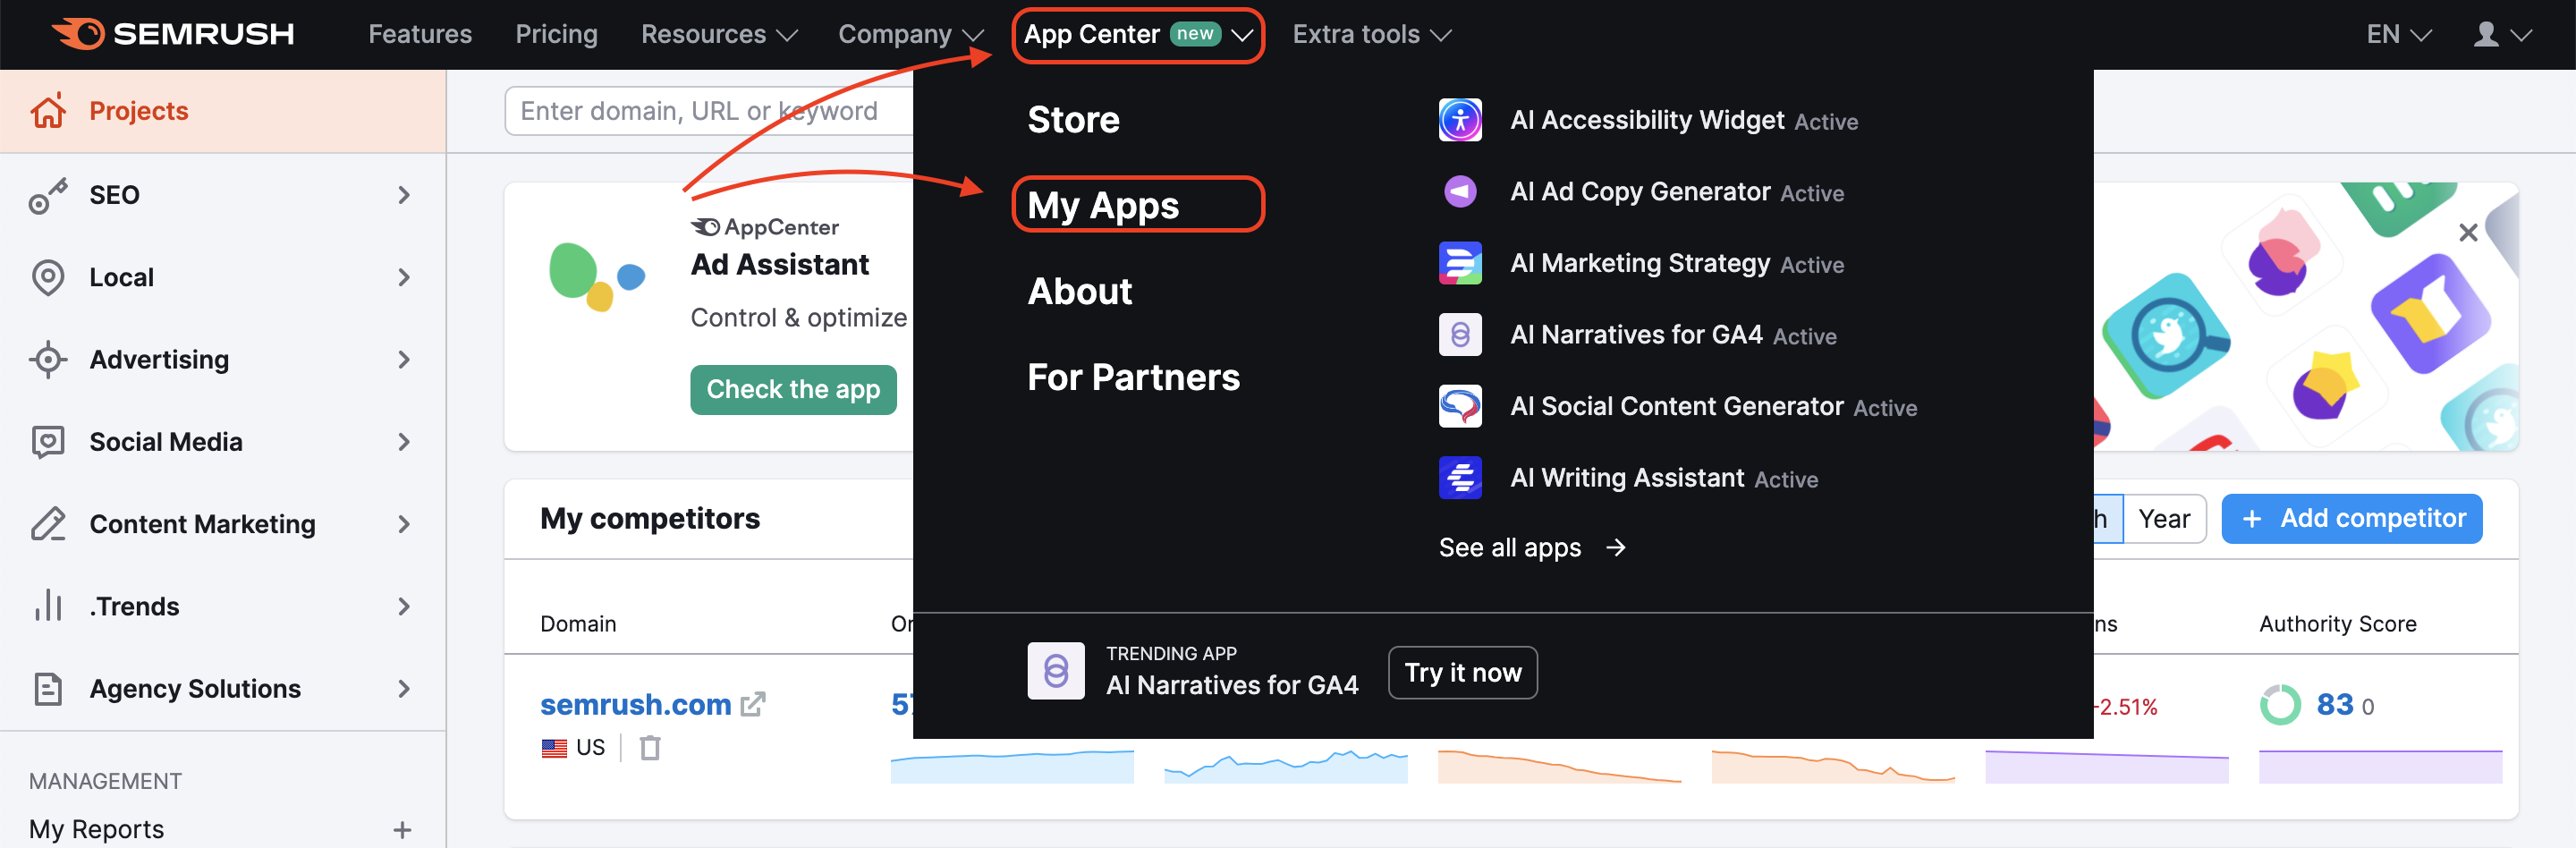  Semrush Projects Dashboard with the App Center drop-down menu. The App Center button in menu at the top of the page and the My Apps button in the drop-down are highlighted with a red rectangle.